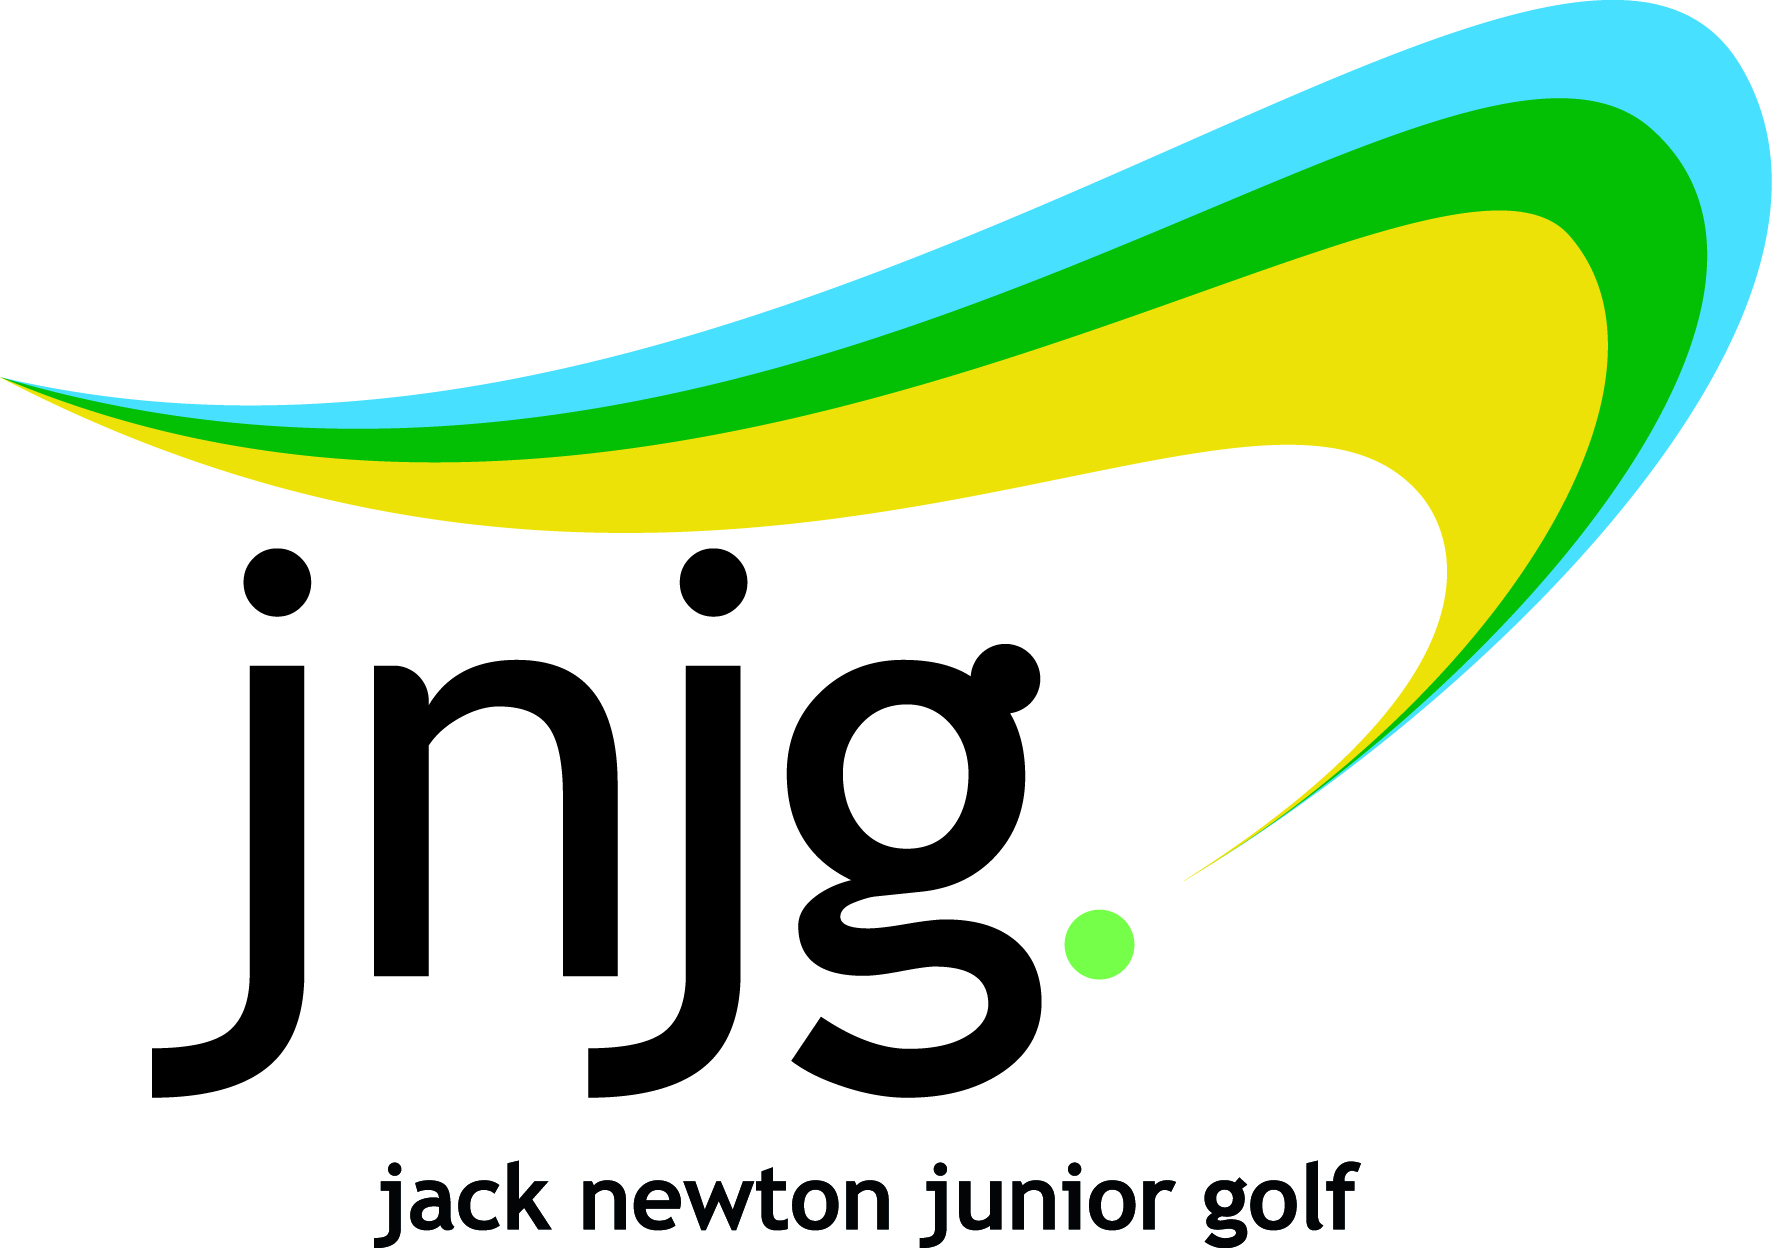 Exciting New Partnership for JNJG